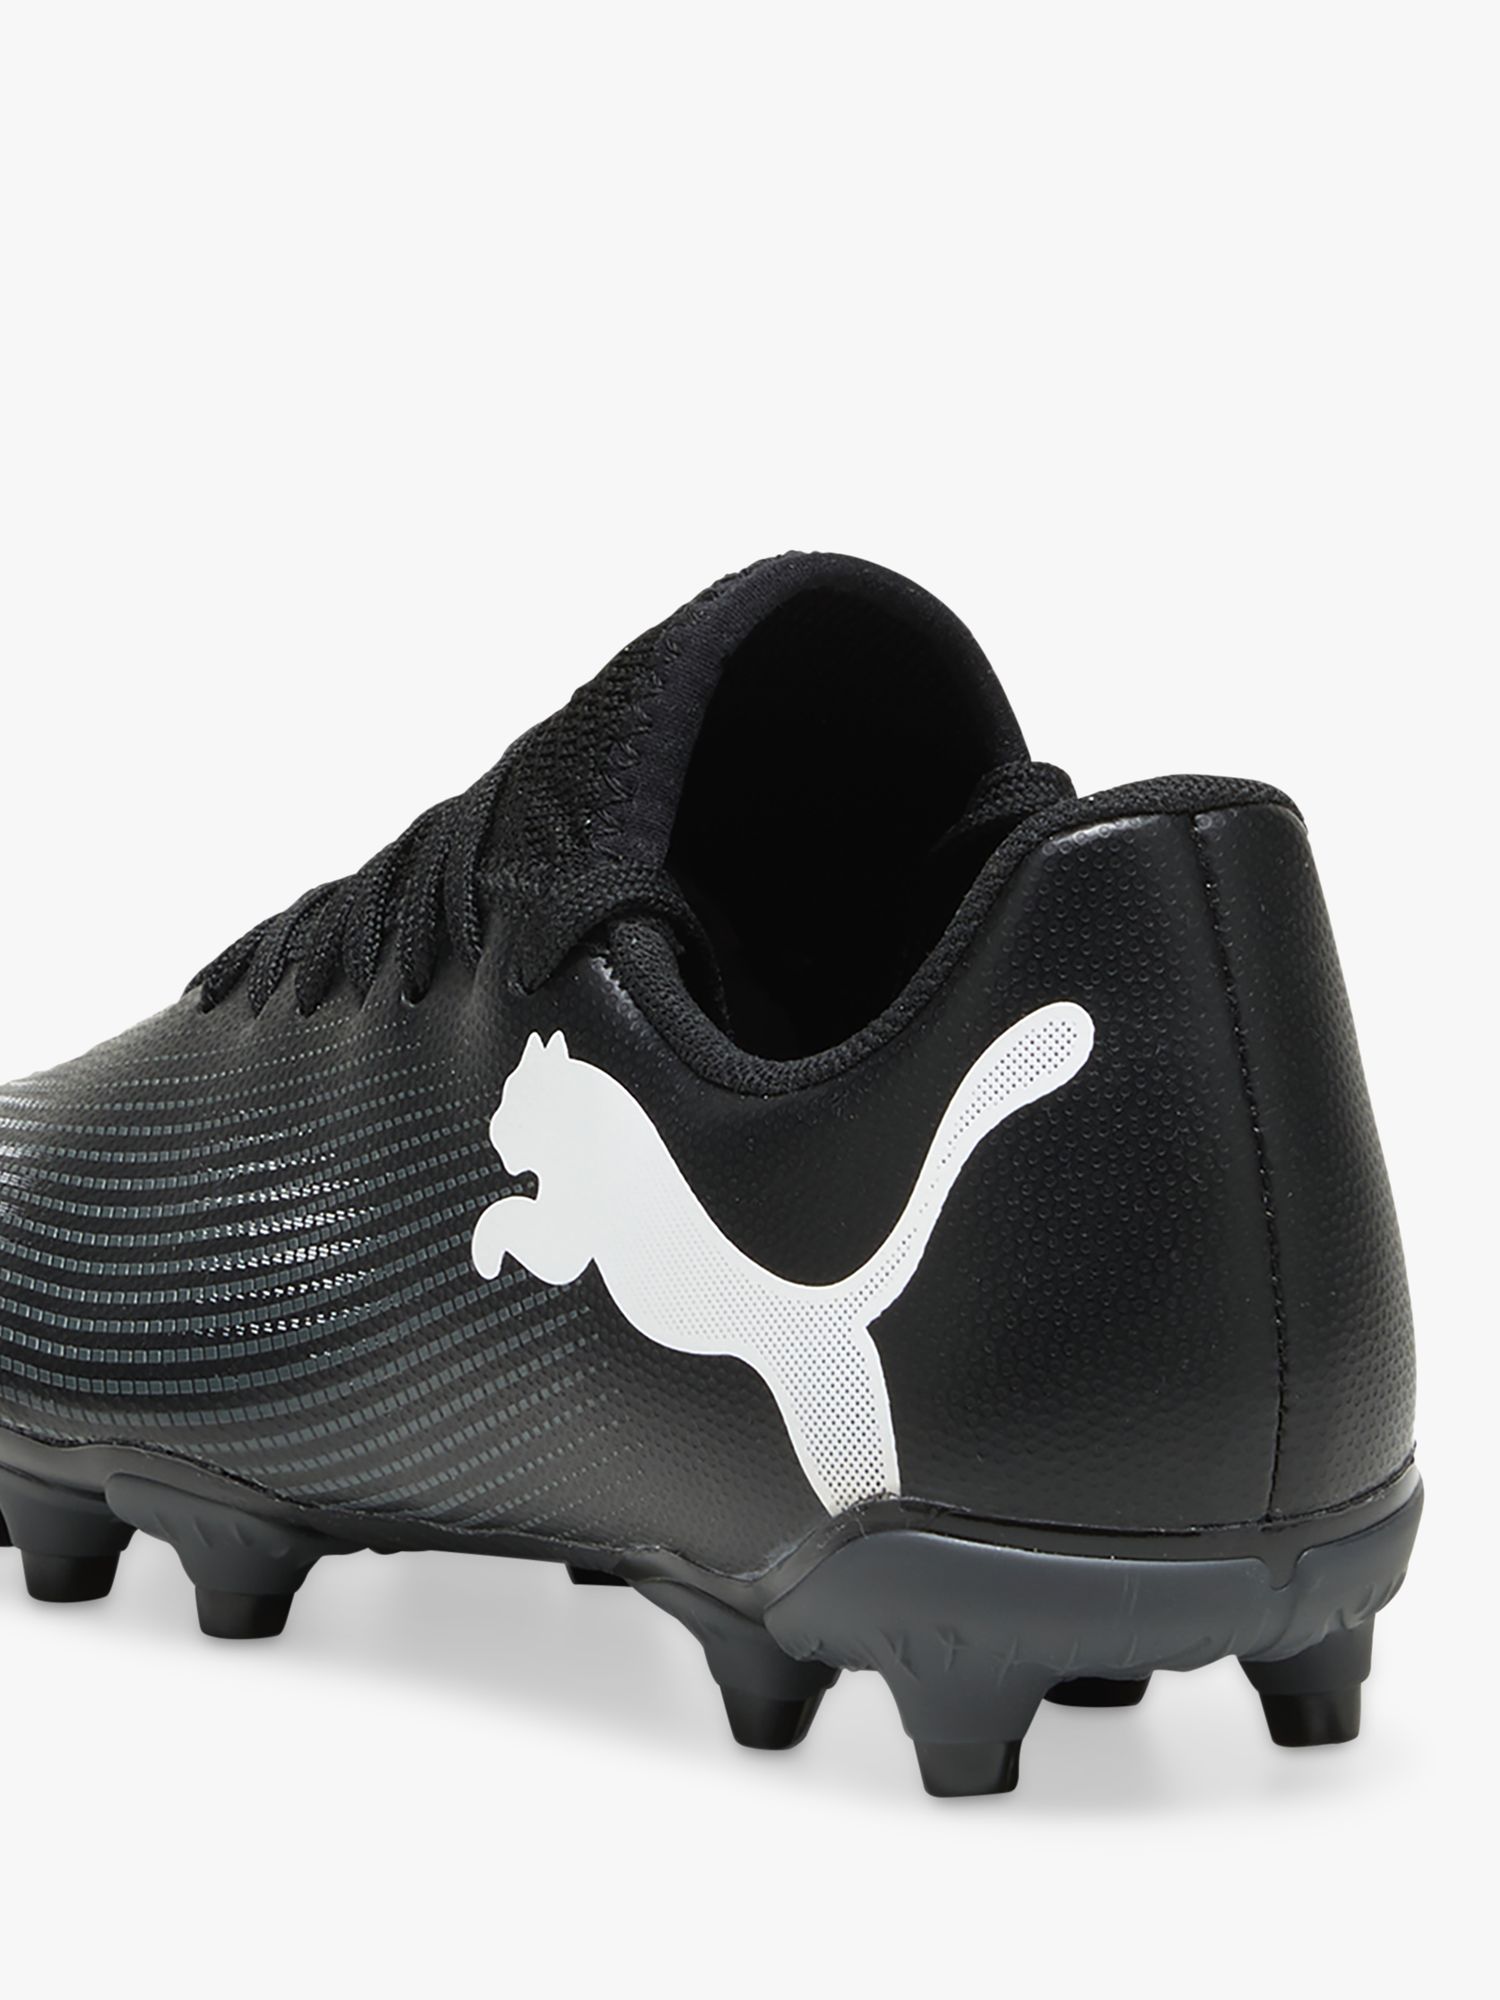 Buy PUMA Kids' Future 7 Playmakers Football Boots Online at johnlewis.com